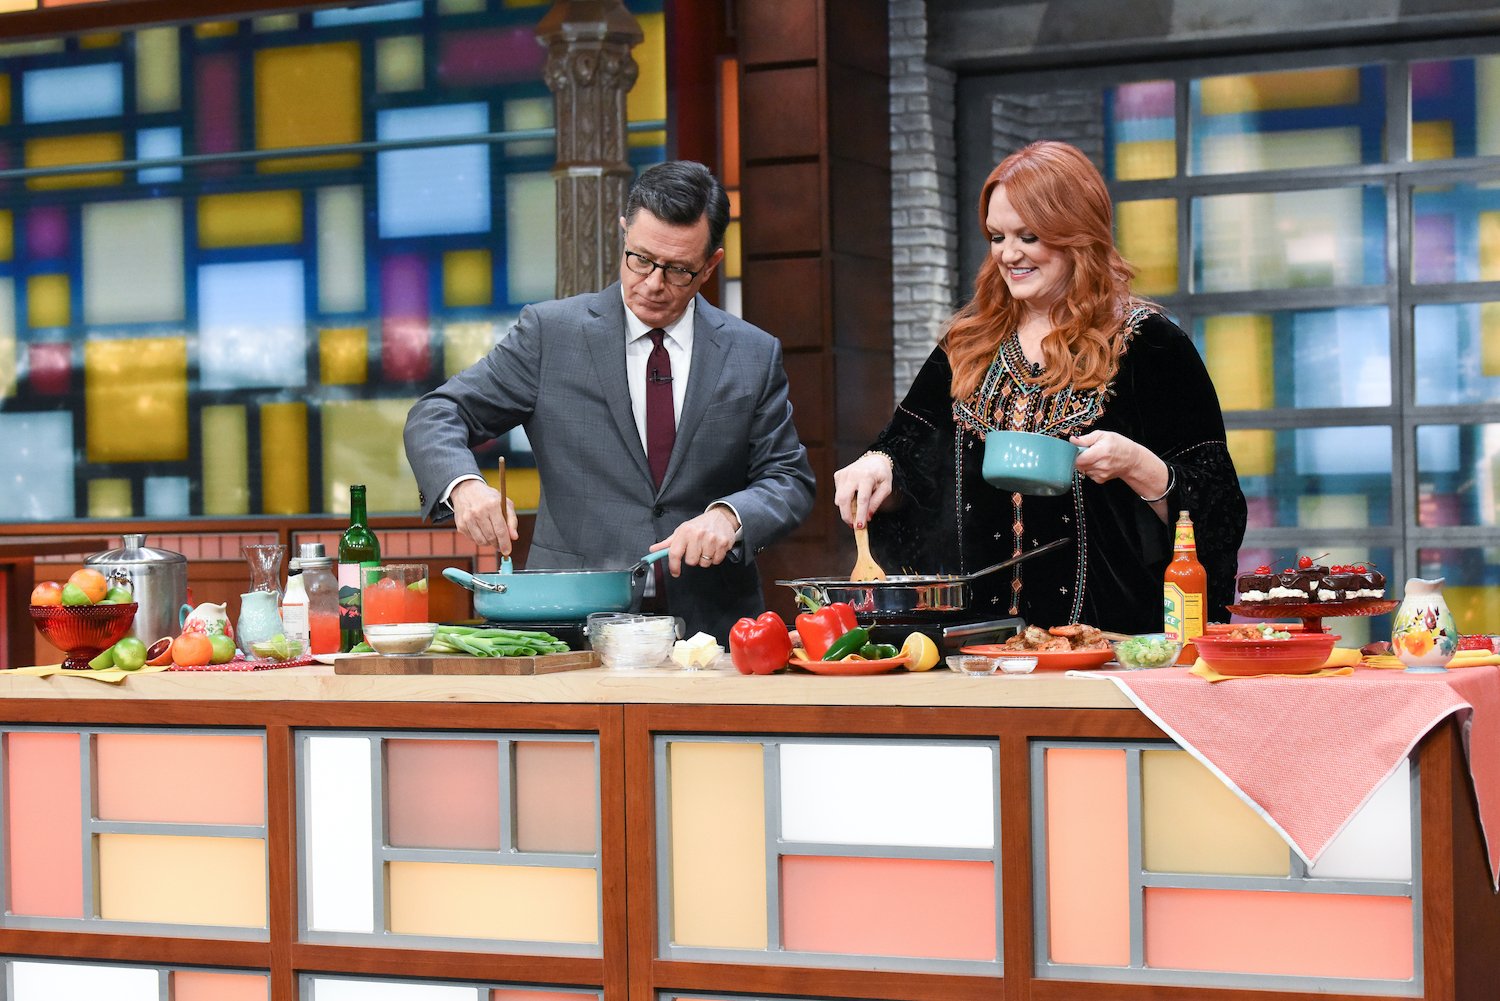 Ree Drummond wears a black top while cooking with Stephen Colbert on The Late Show with Stephen Colbert in 2019 on 'The Late Show'